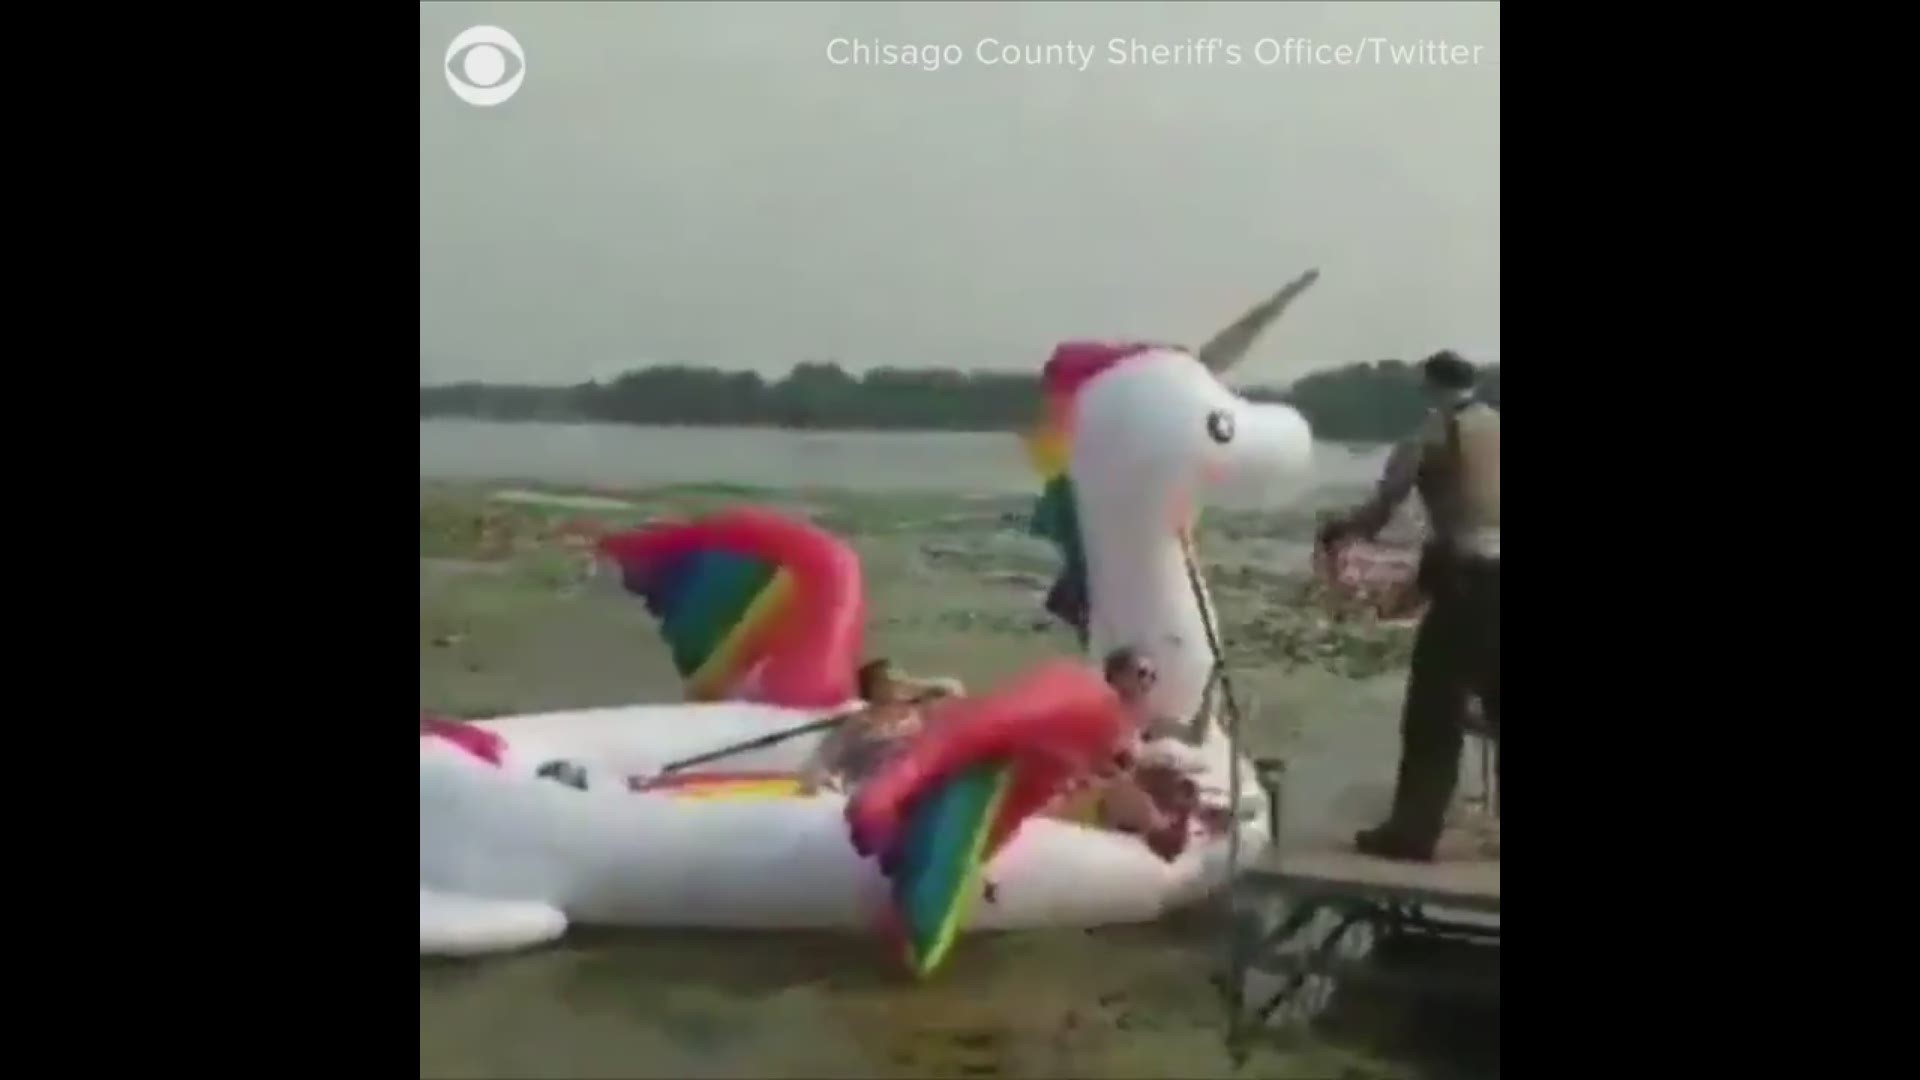 It's something you have to see to believe. A group of women got snagged in some weeds while riding a rainbow unicorn.